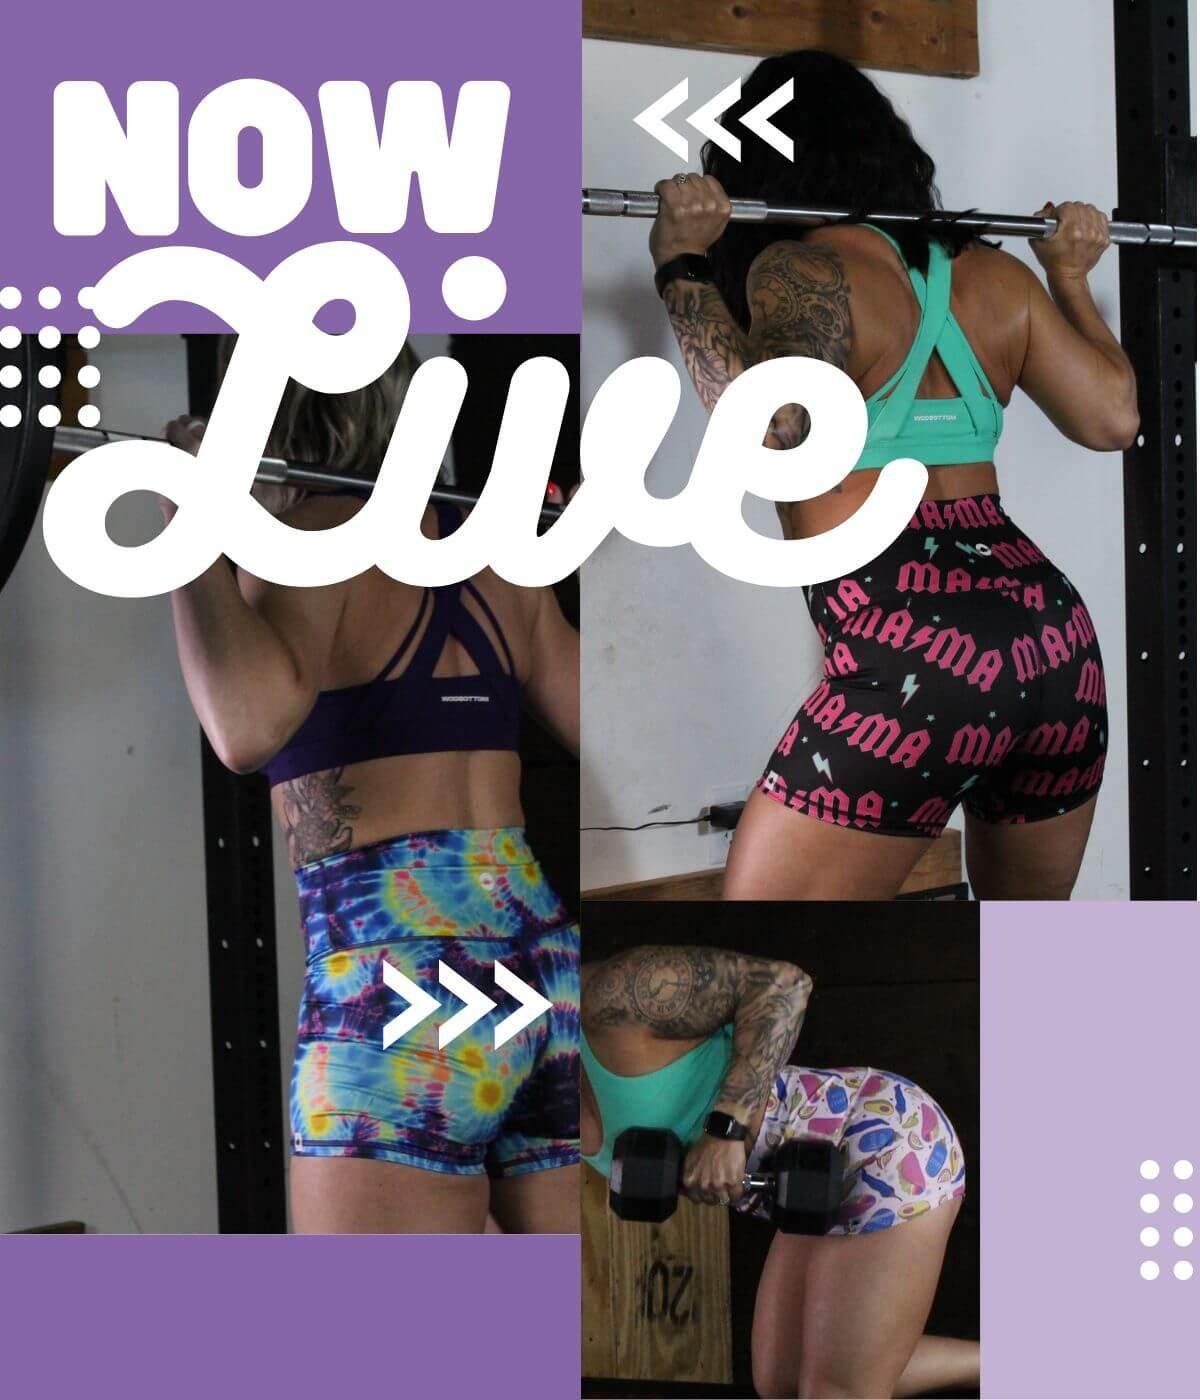 New goodies live to members!